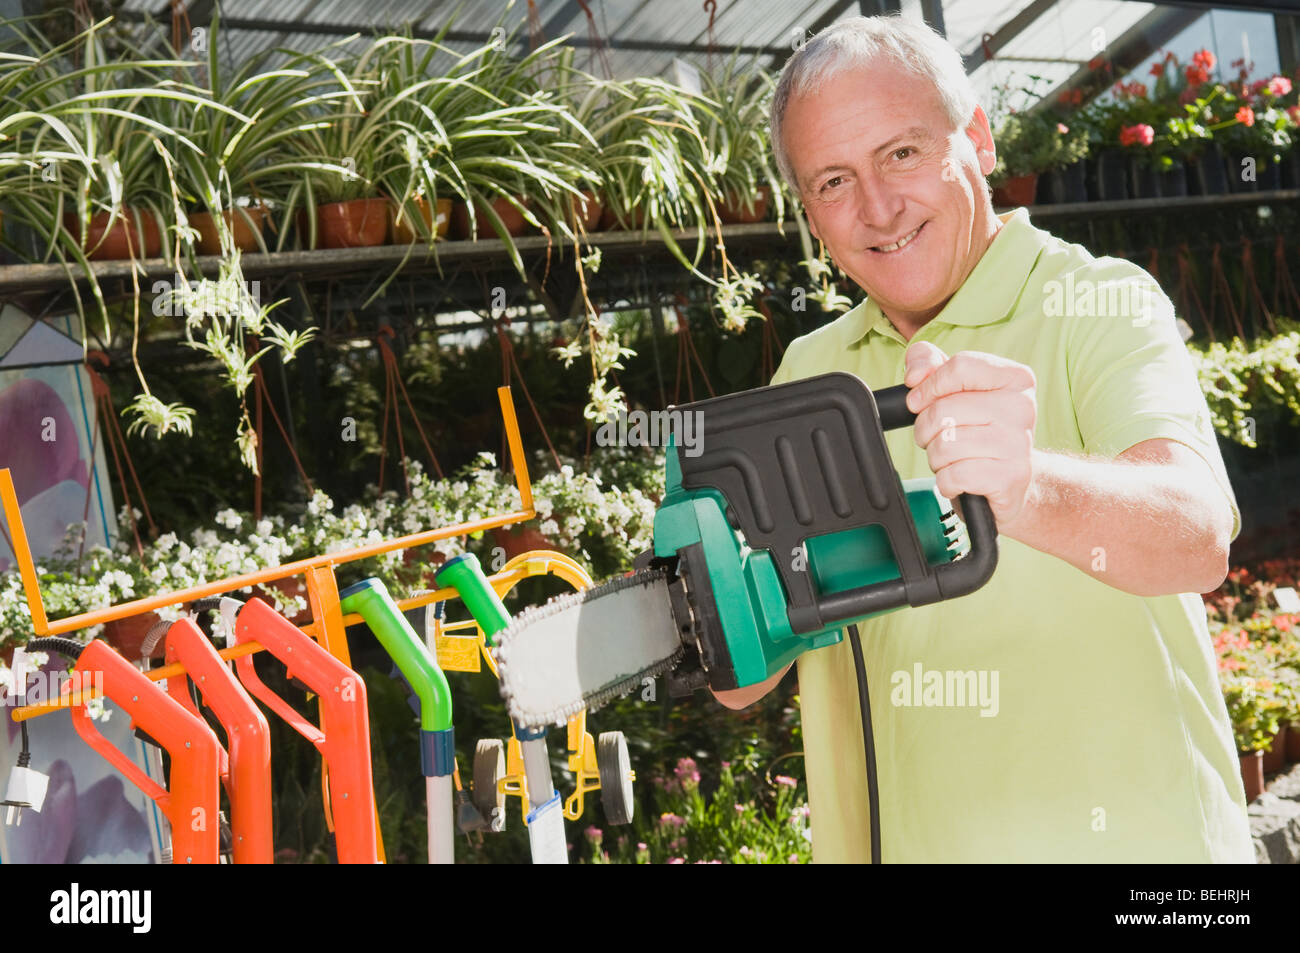 Man holding a chainsaw in a hardware store Stock Photo